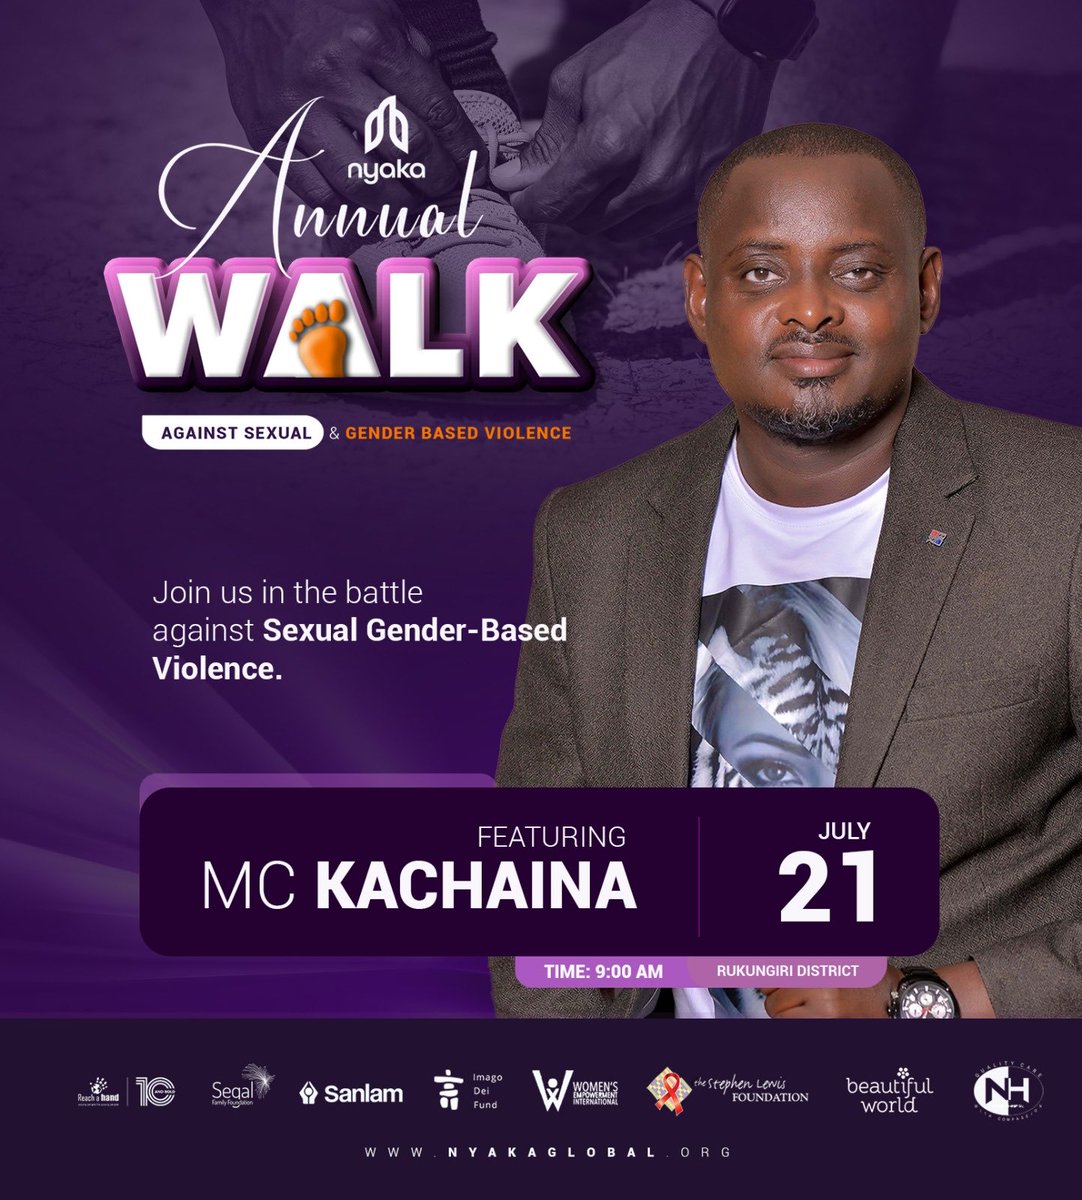 I ⁦⁦@Kachaina1⁩ will walk with ⁦@NyakaGlobal⁩ to take a stand against Sexual and Gender-Based Violence.
You too can join the movement and make a difference! 
#NyakaWalk23 #NyakaSGBVWalk
#Rukungiri #EnoughIsEnough #EndSGBV #DontDoIt #Otakikora